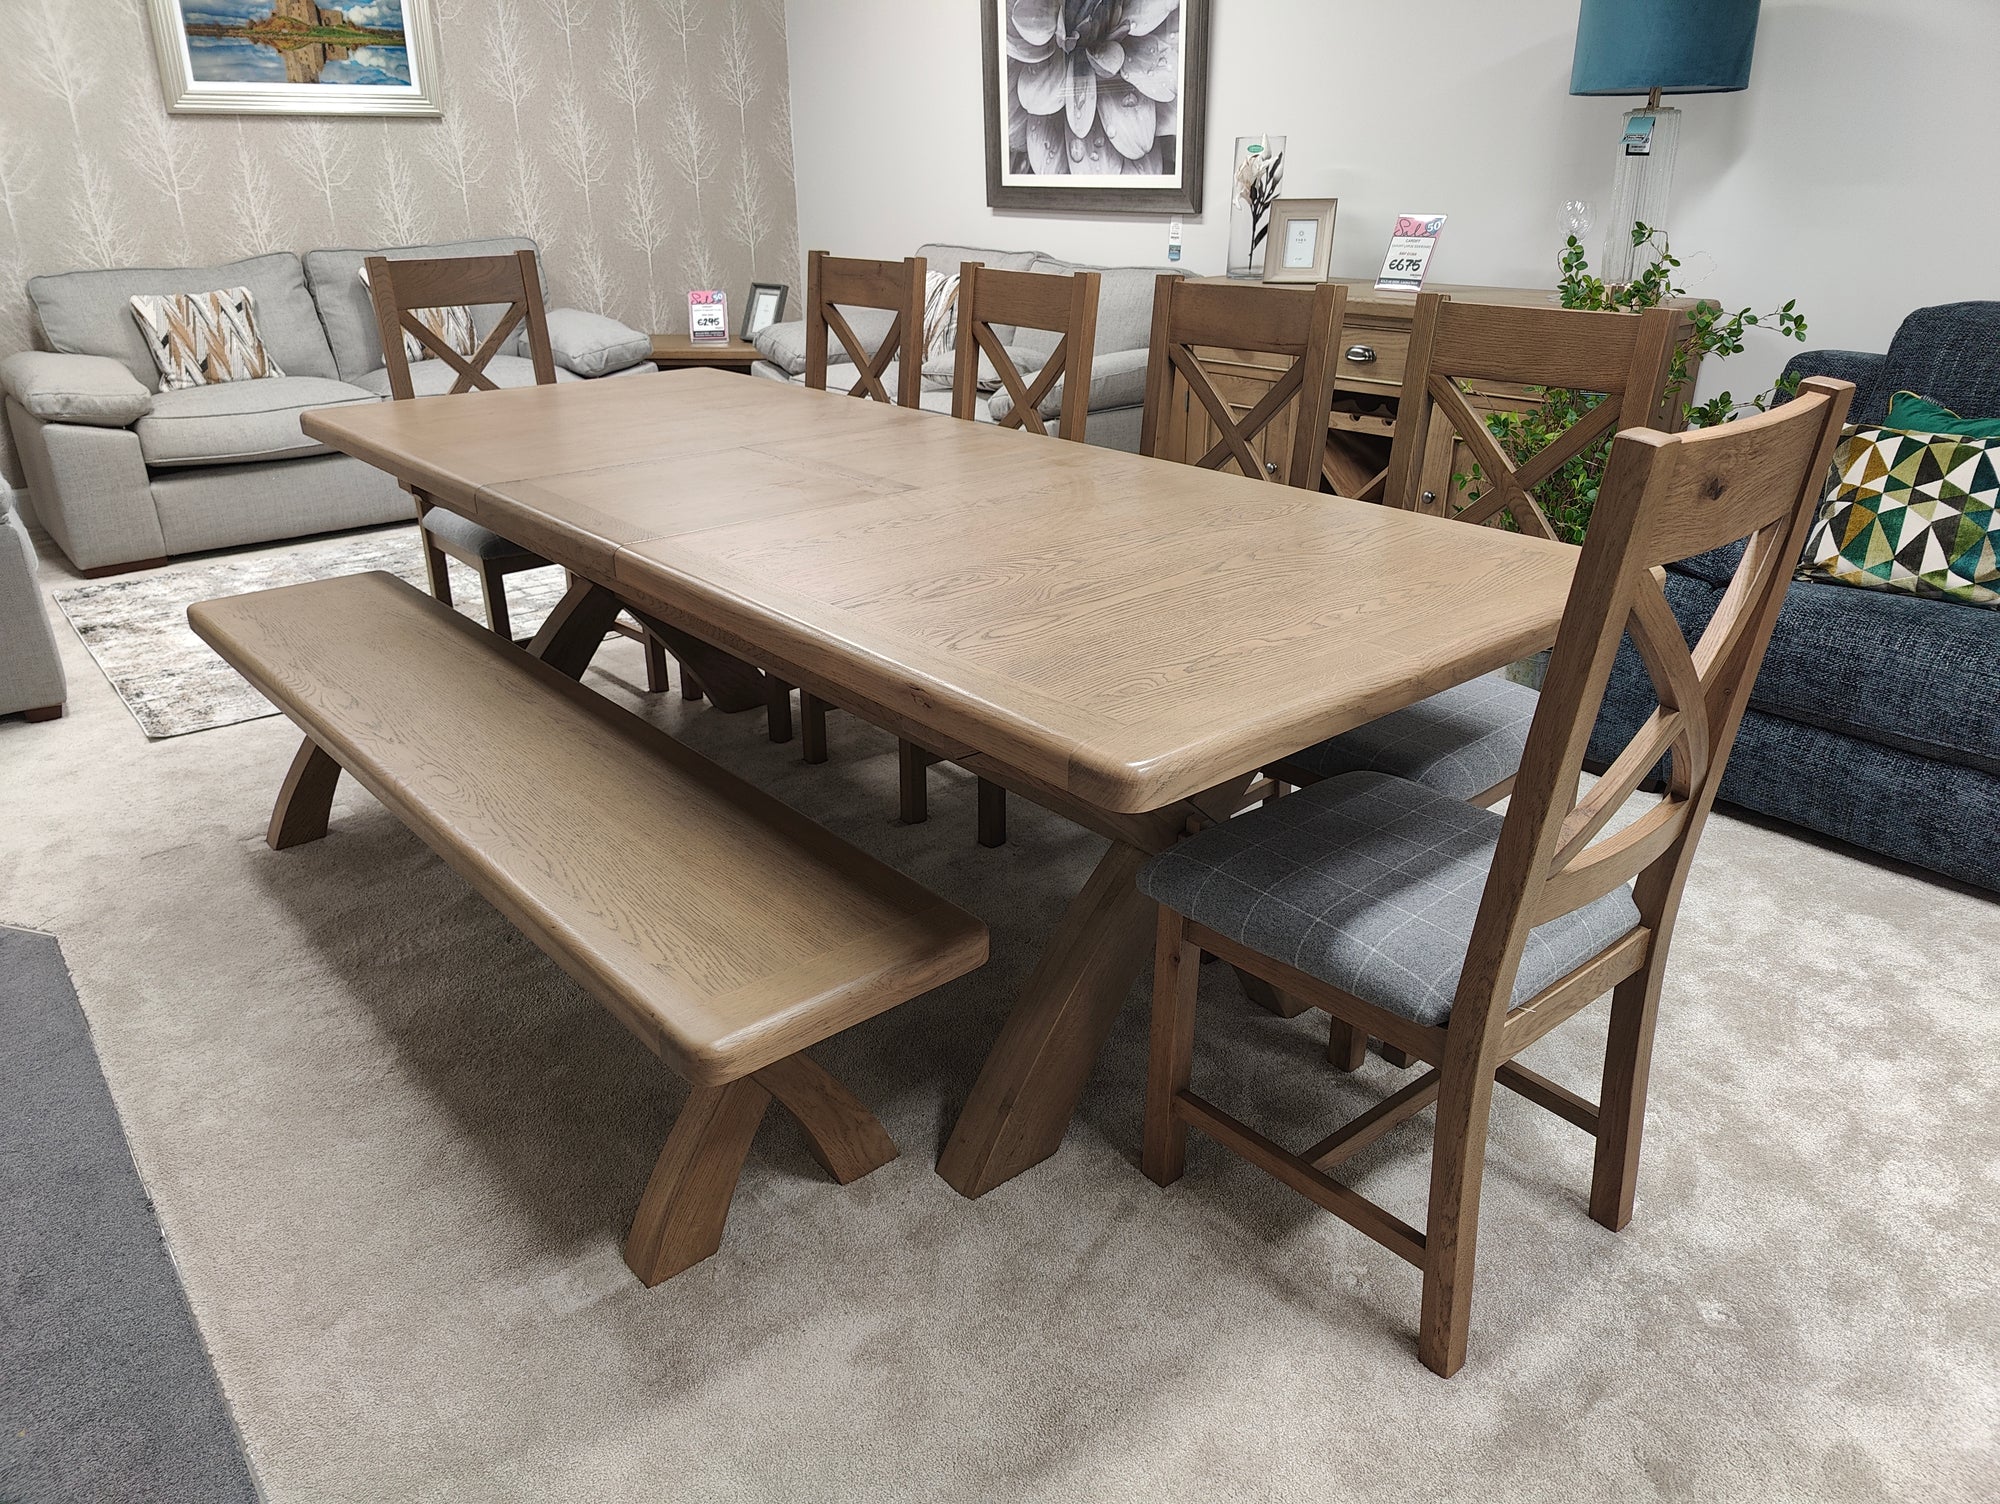 Cardiff Table, Bench and 3 x Chairs